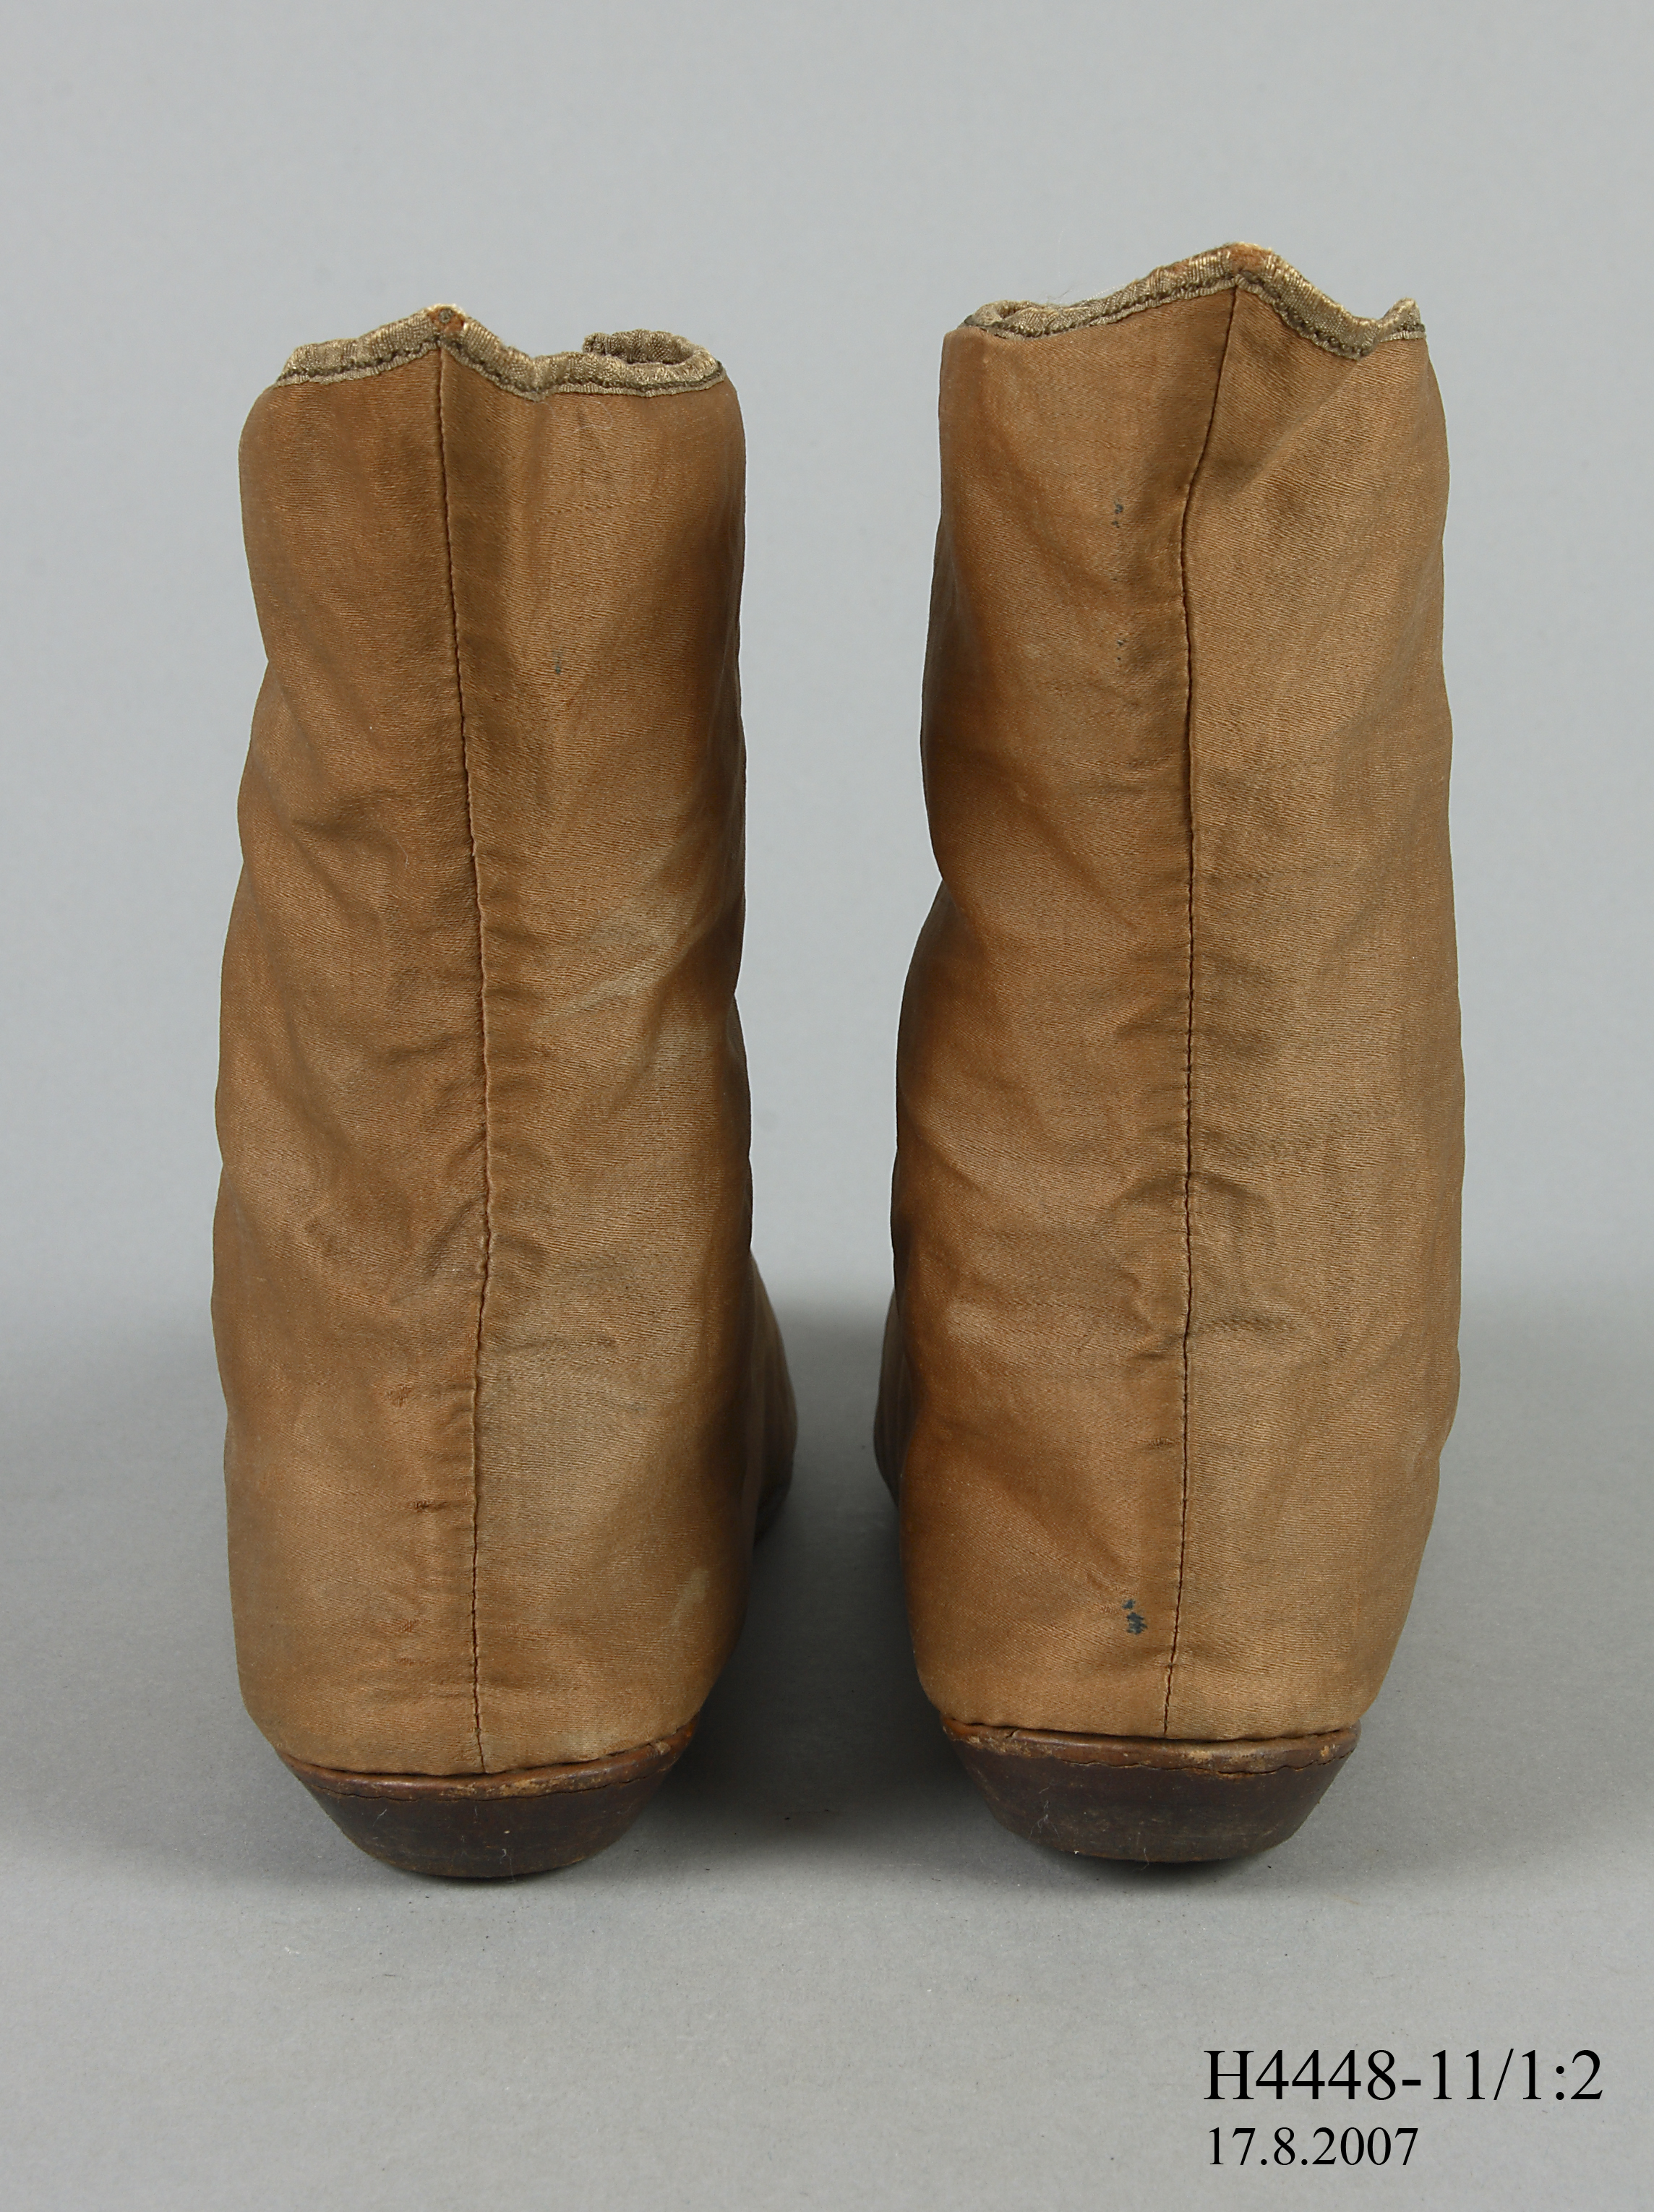 Pair of ankle boots from the Joseph Box collection